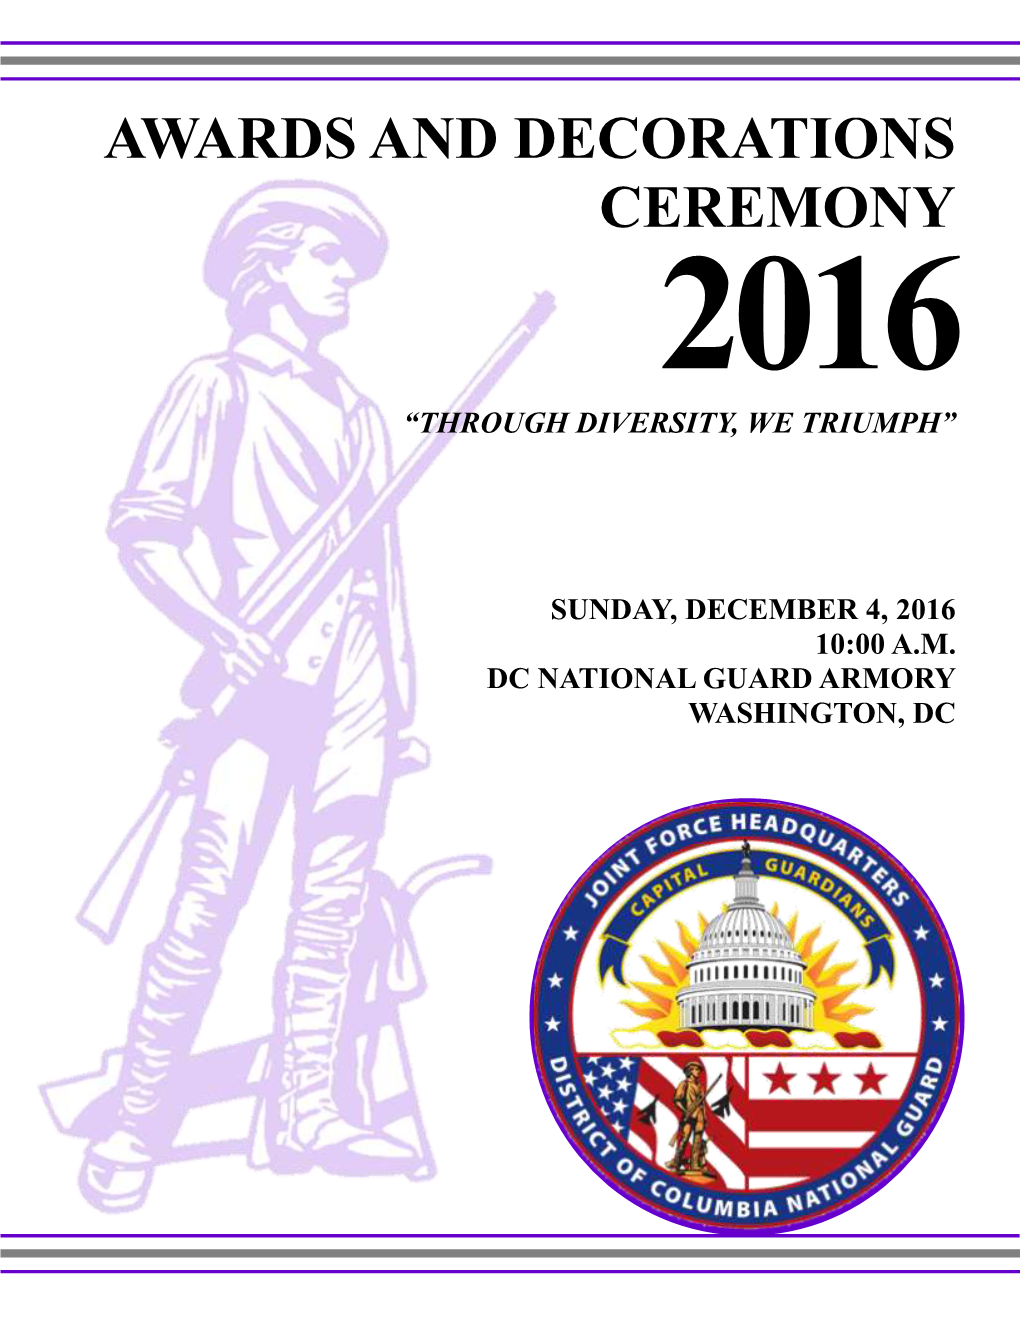 Awards and Decorations Ceremony 2016 “Through Diversity, We Triumph”